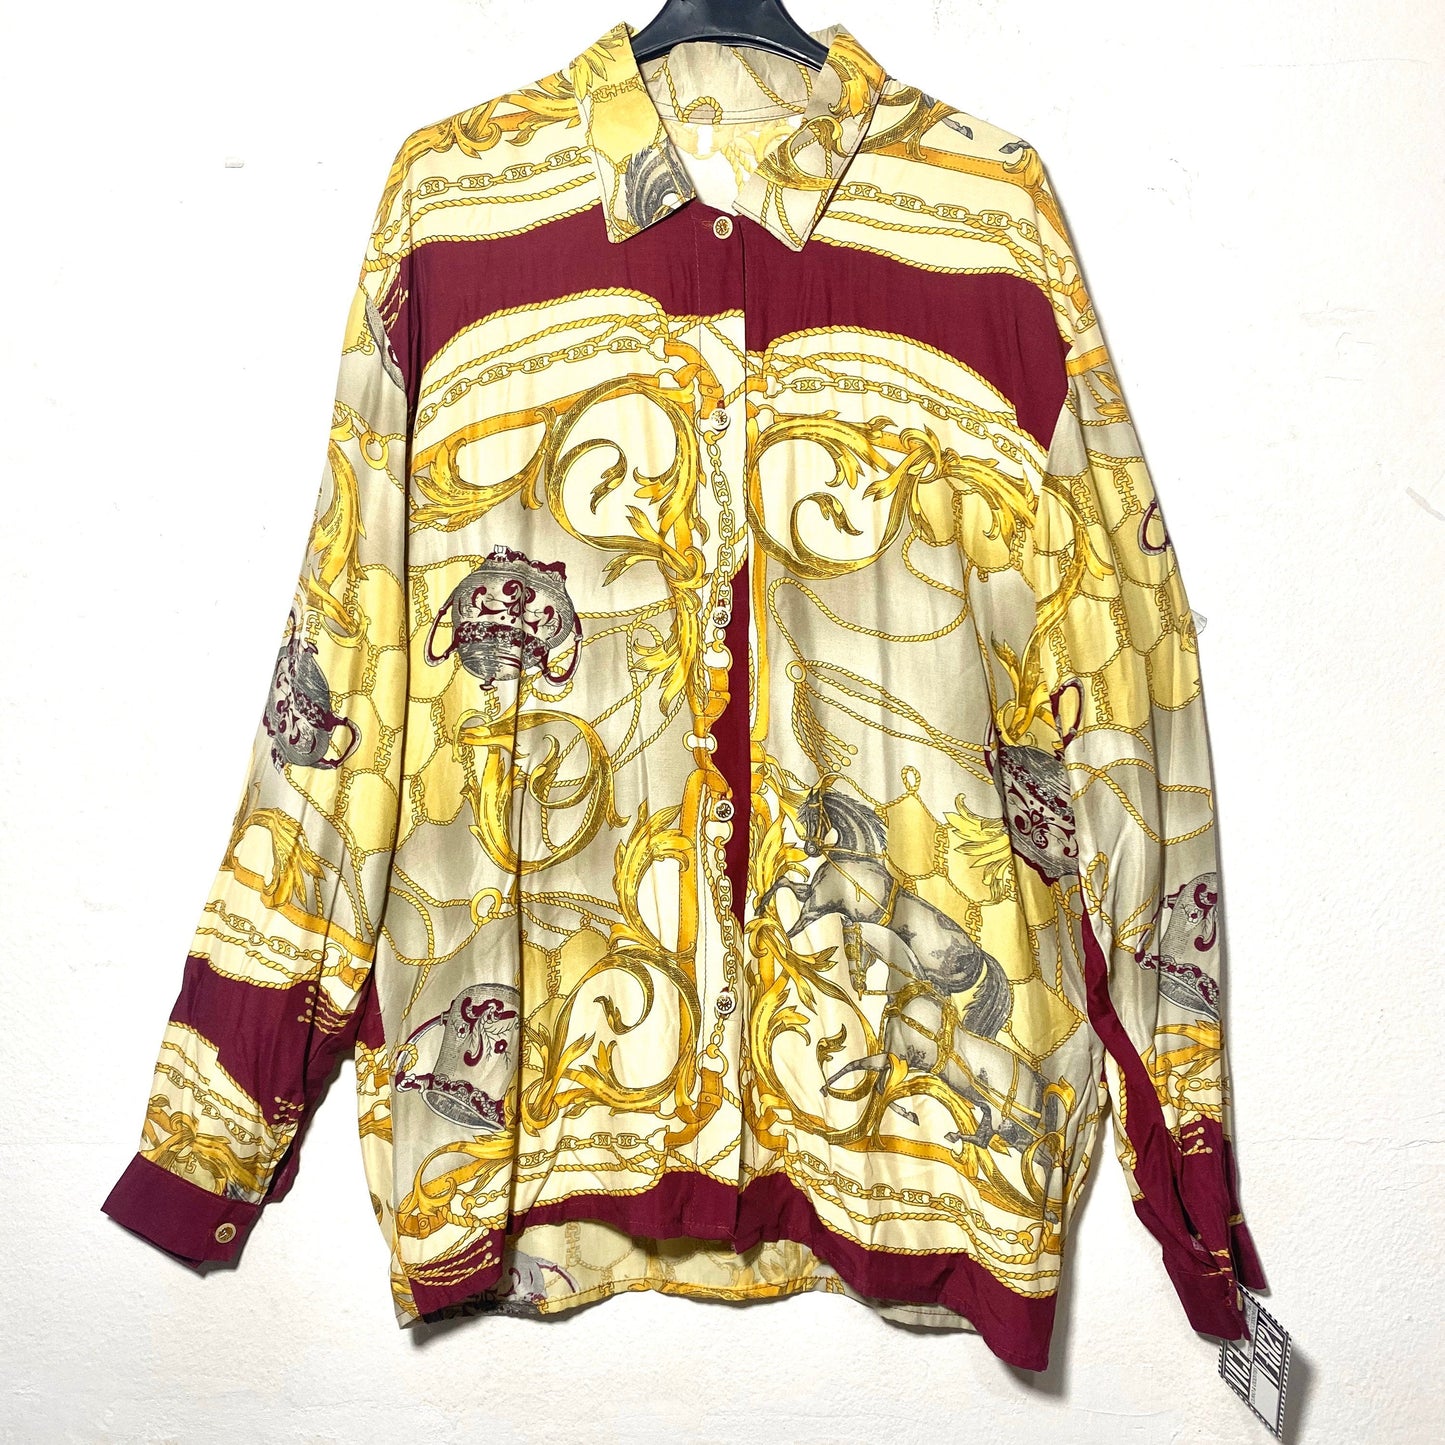 Incredible baroque chain print shirt with horses and teapots allover, beautiful viscose fabric, 80s and mint